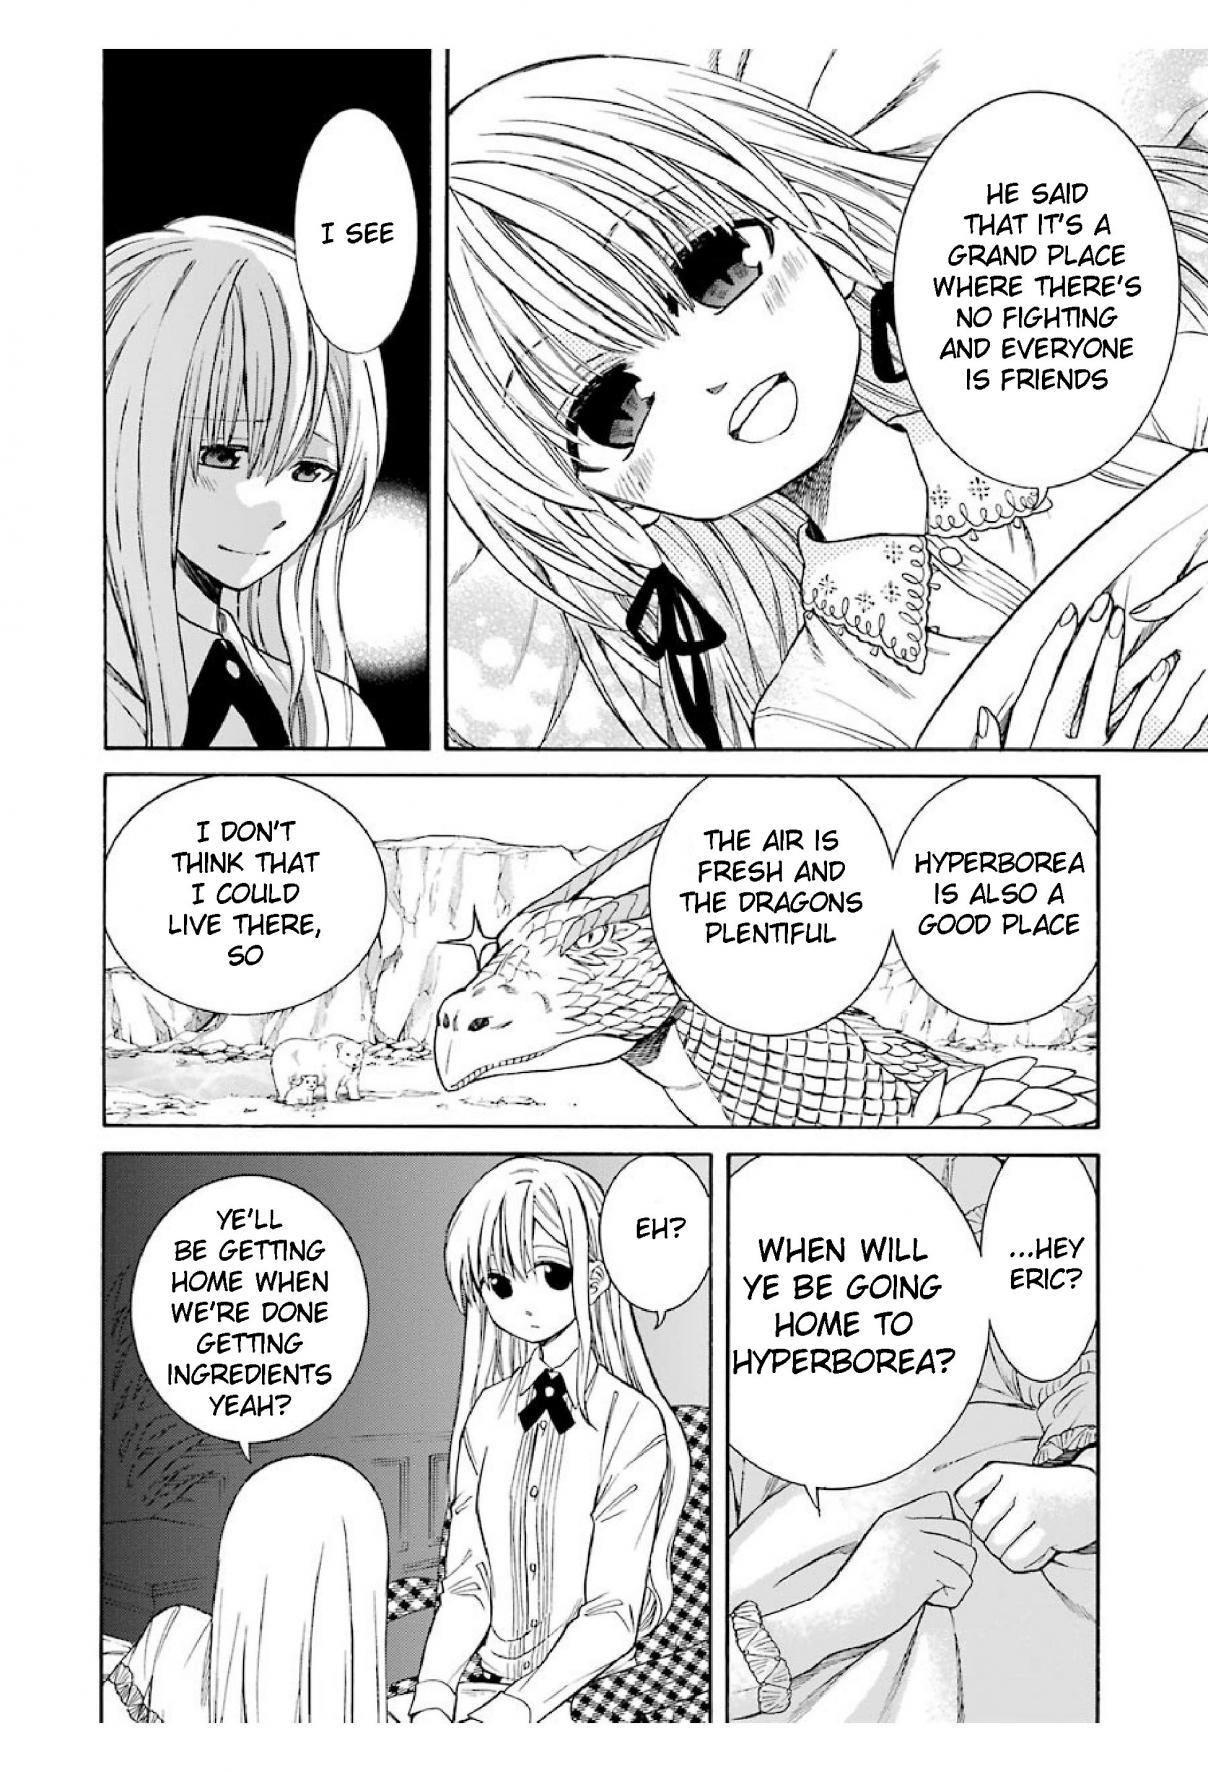 Majo no Geboku to Maou no Tsuno Ch. 16 The Witch's Servant and the Allure of Blood (1)